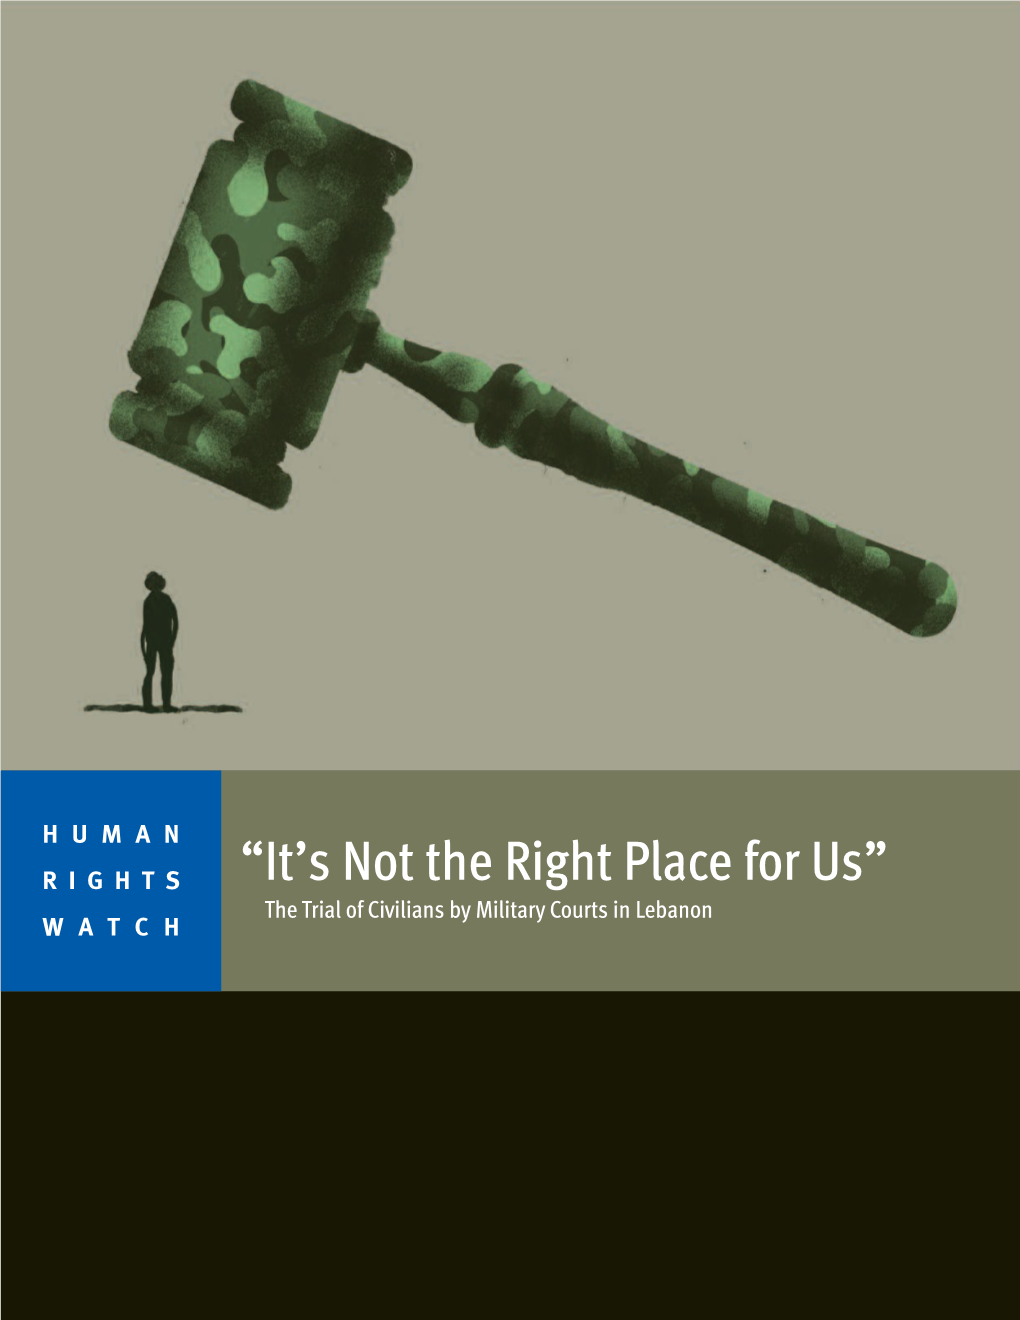 “It's Not the Right Place For